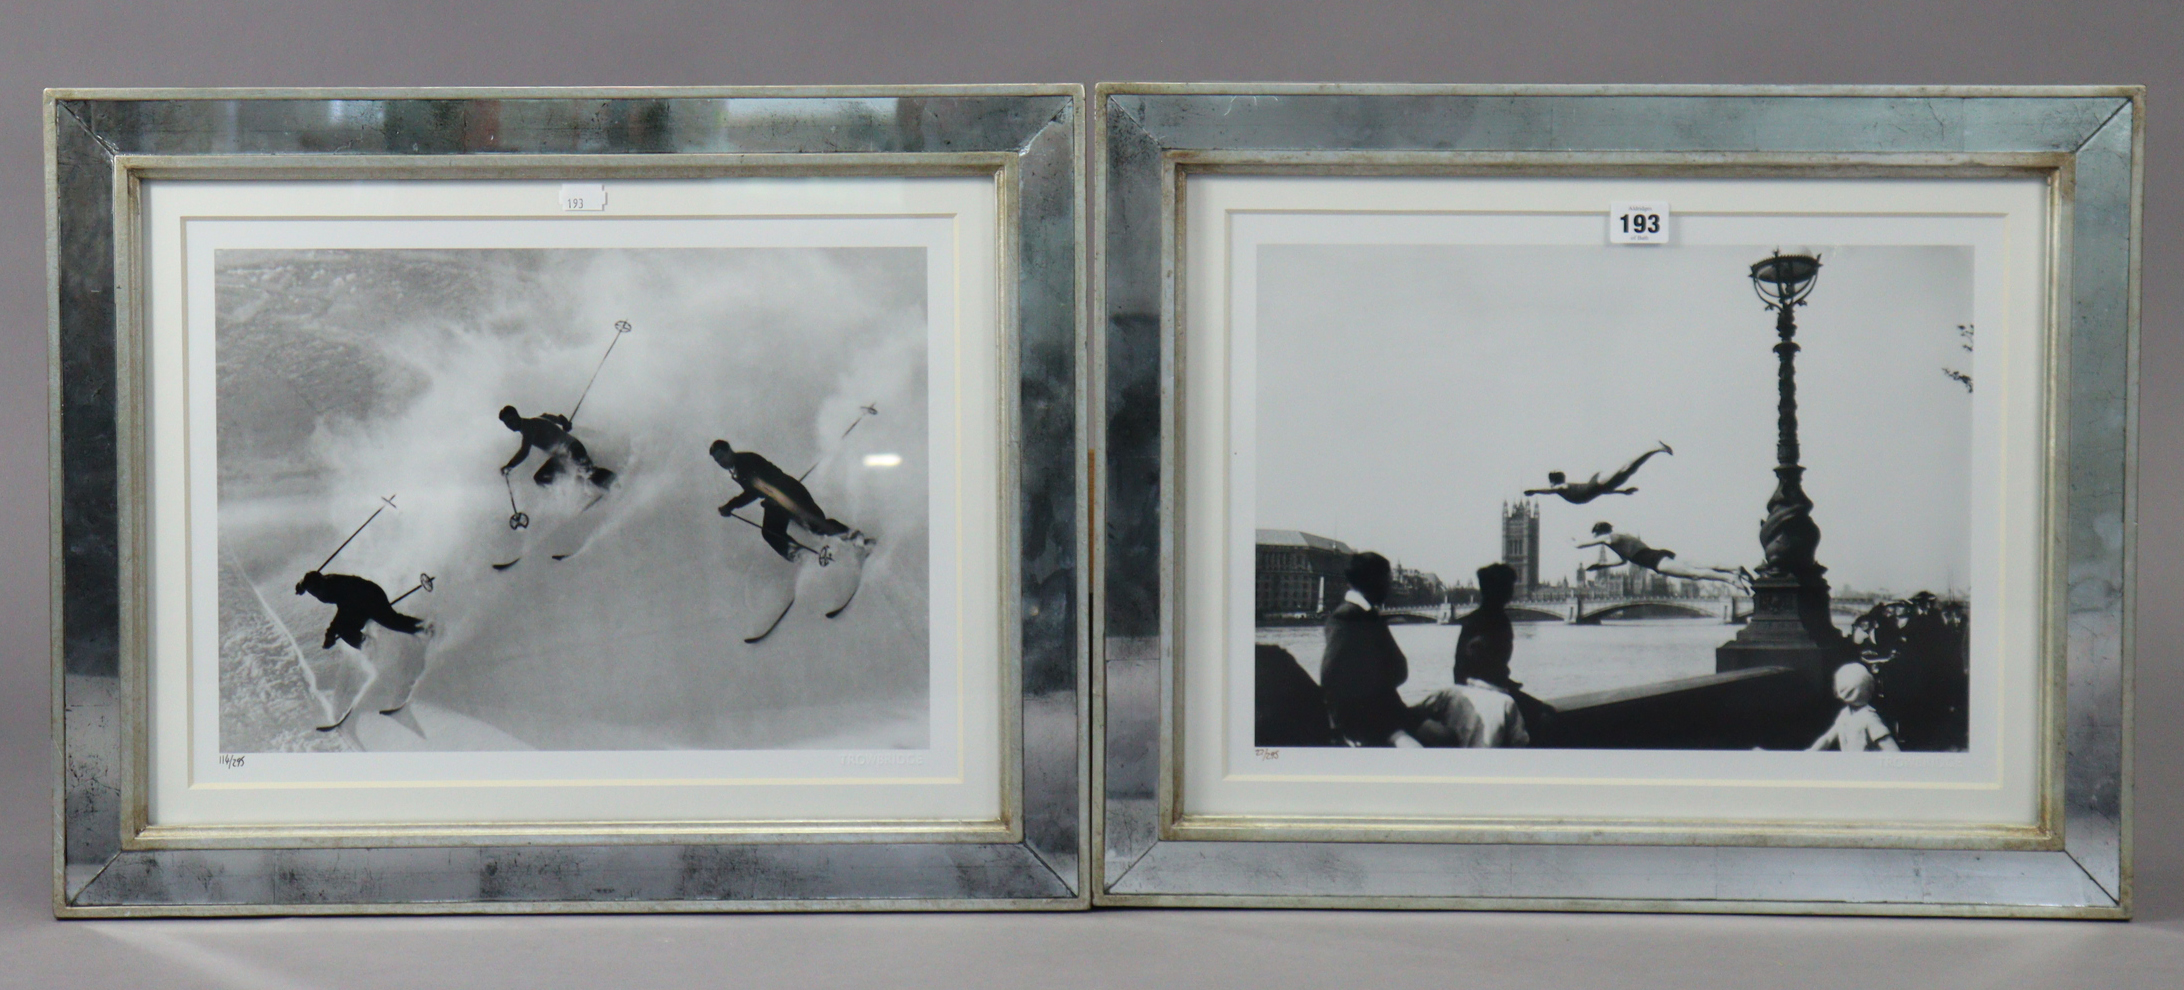 Two Trowbridge Archive collection Limited Edition photographic prints titled “London Divers” & “